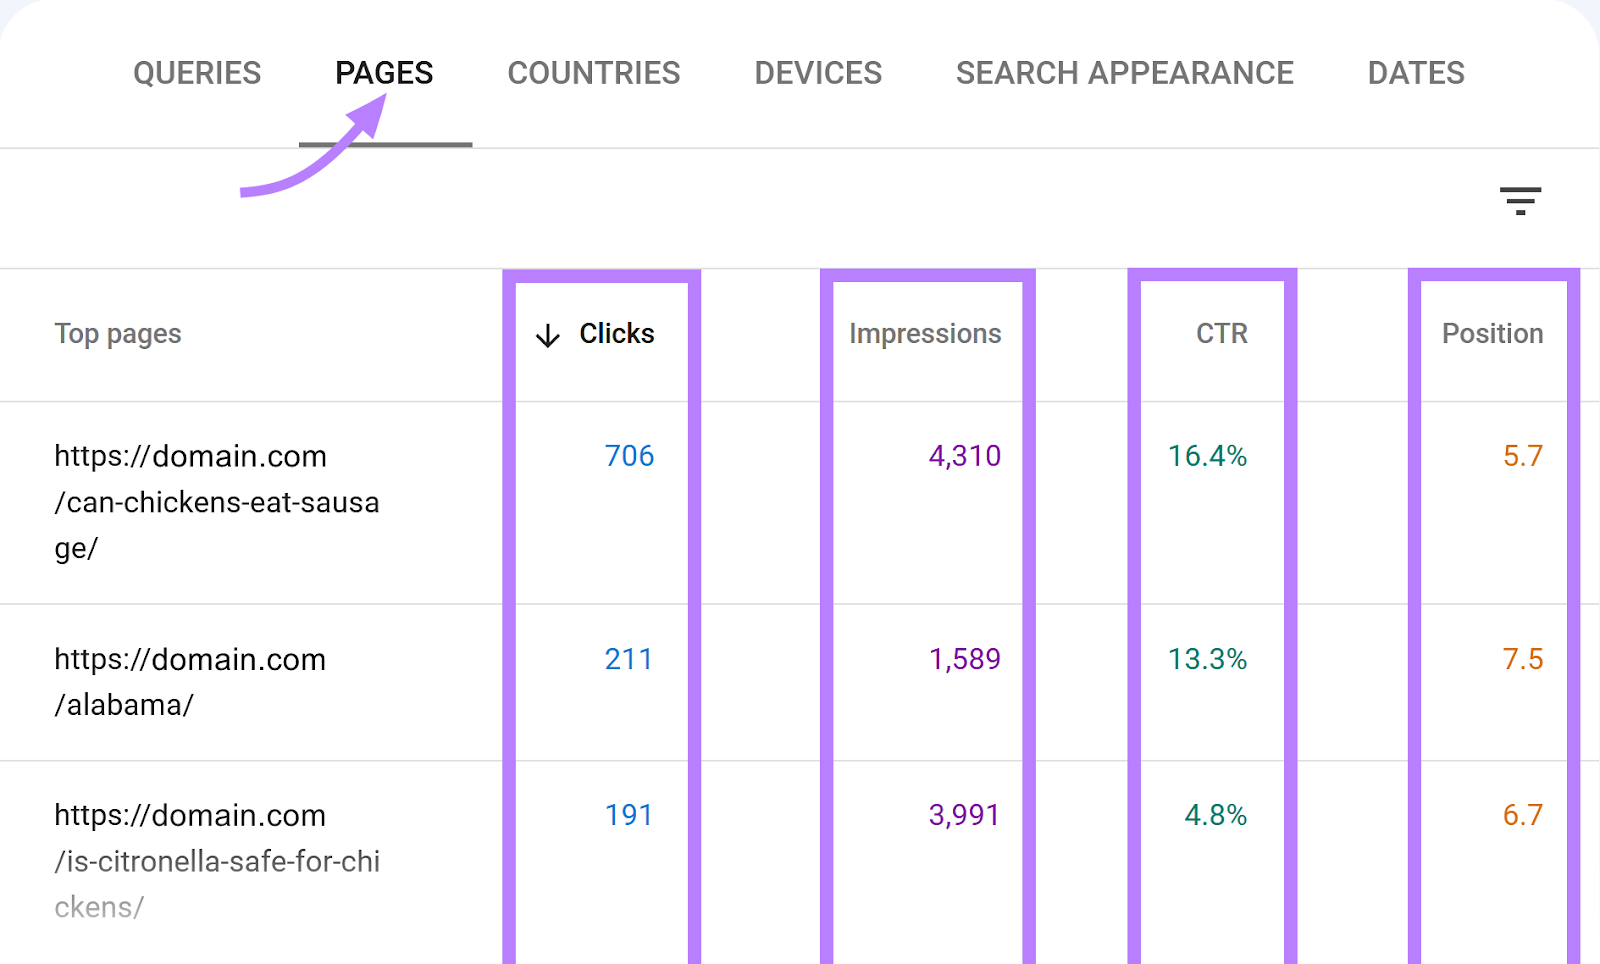 Google Search Console Pages report breaking down top pages by clicks, impressions, ctr, and position